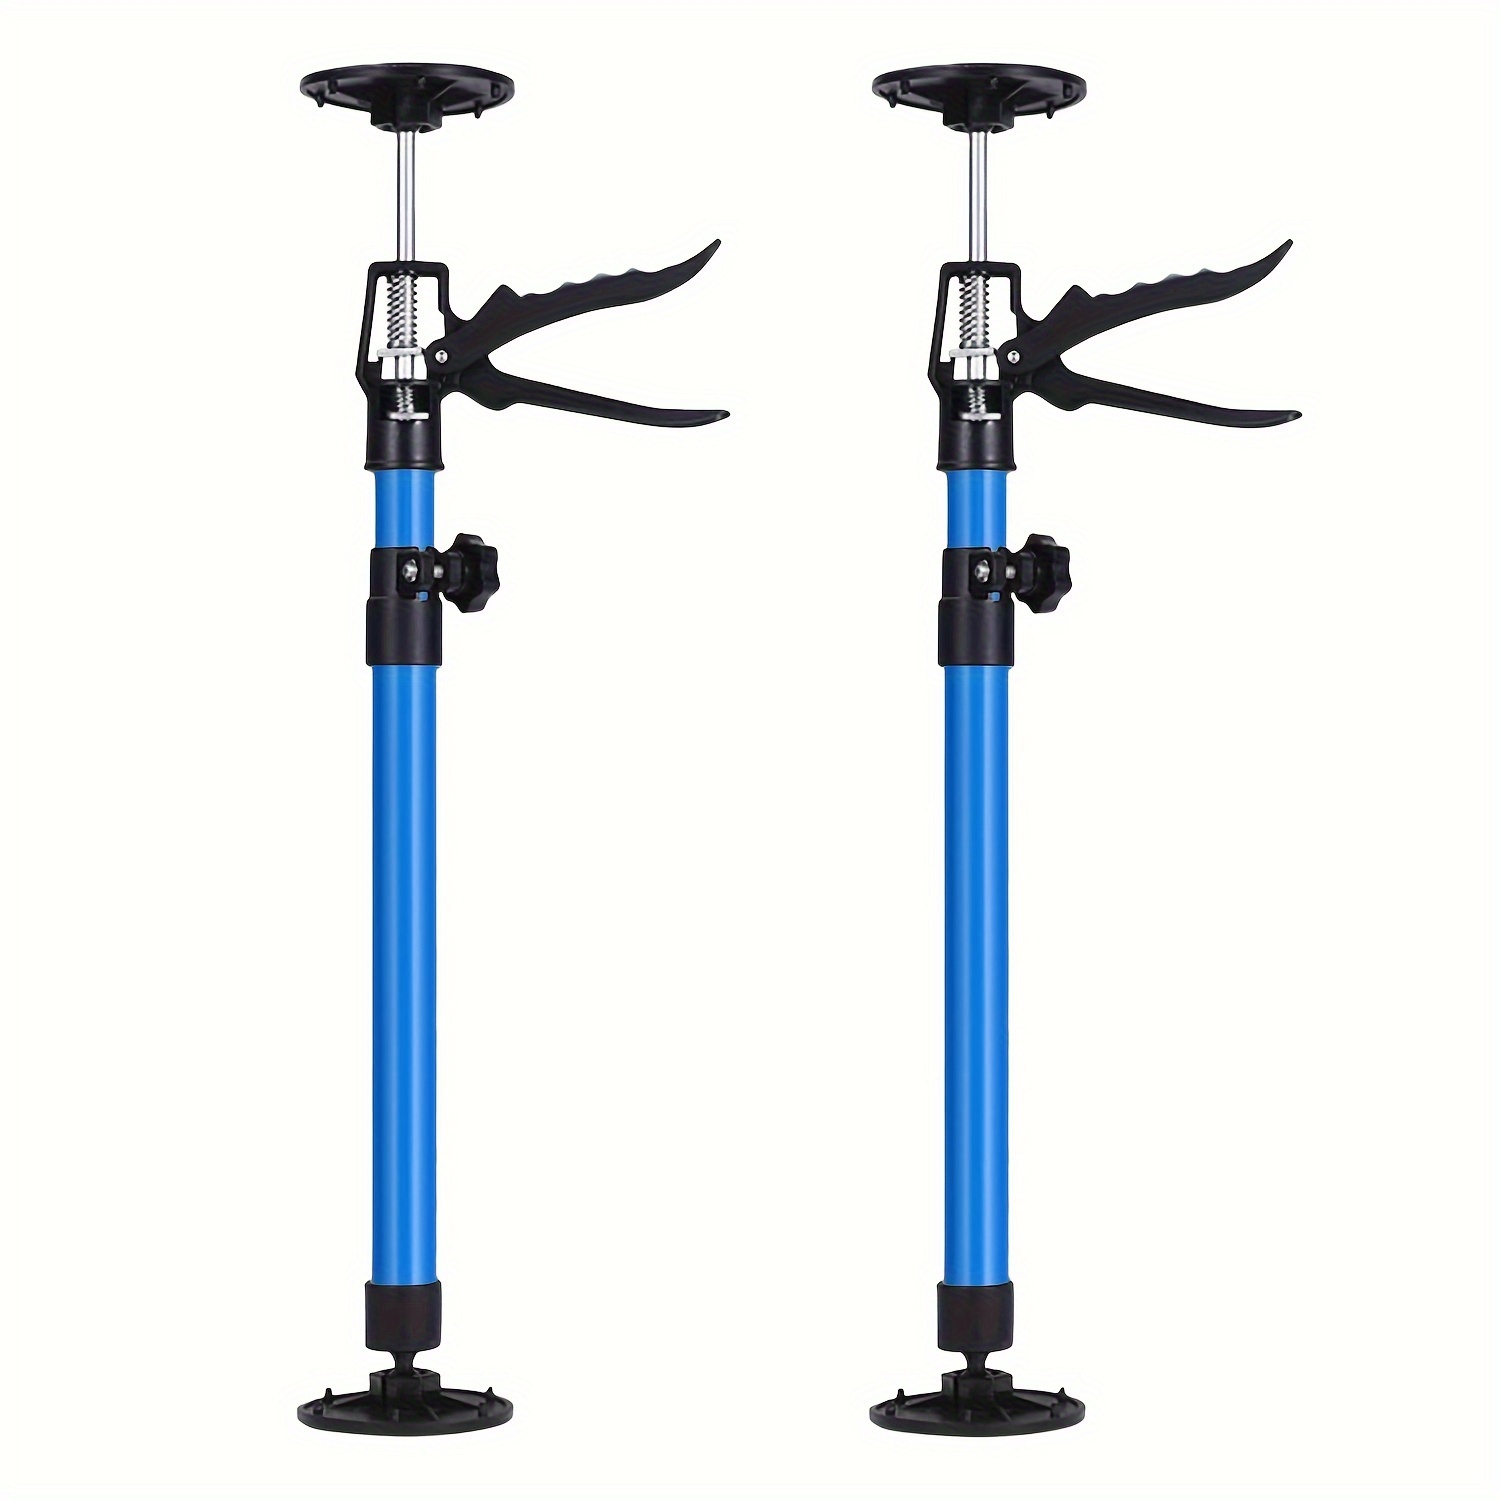 

2pcs Adjustable Metal Support Poles, 3rd Hand Tool Cabinet Jacks, Telescopic Steel Labor-saving Hand Work Support System For Stairs, , Decks